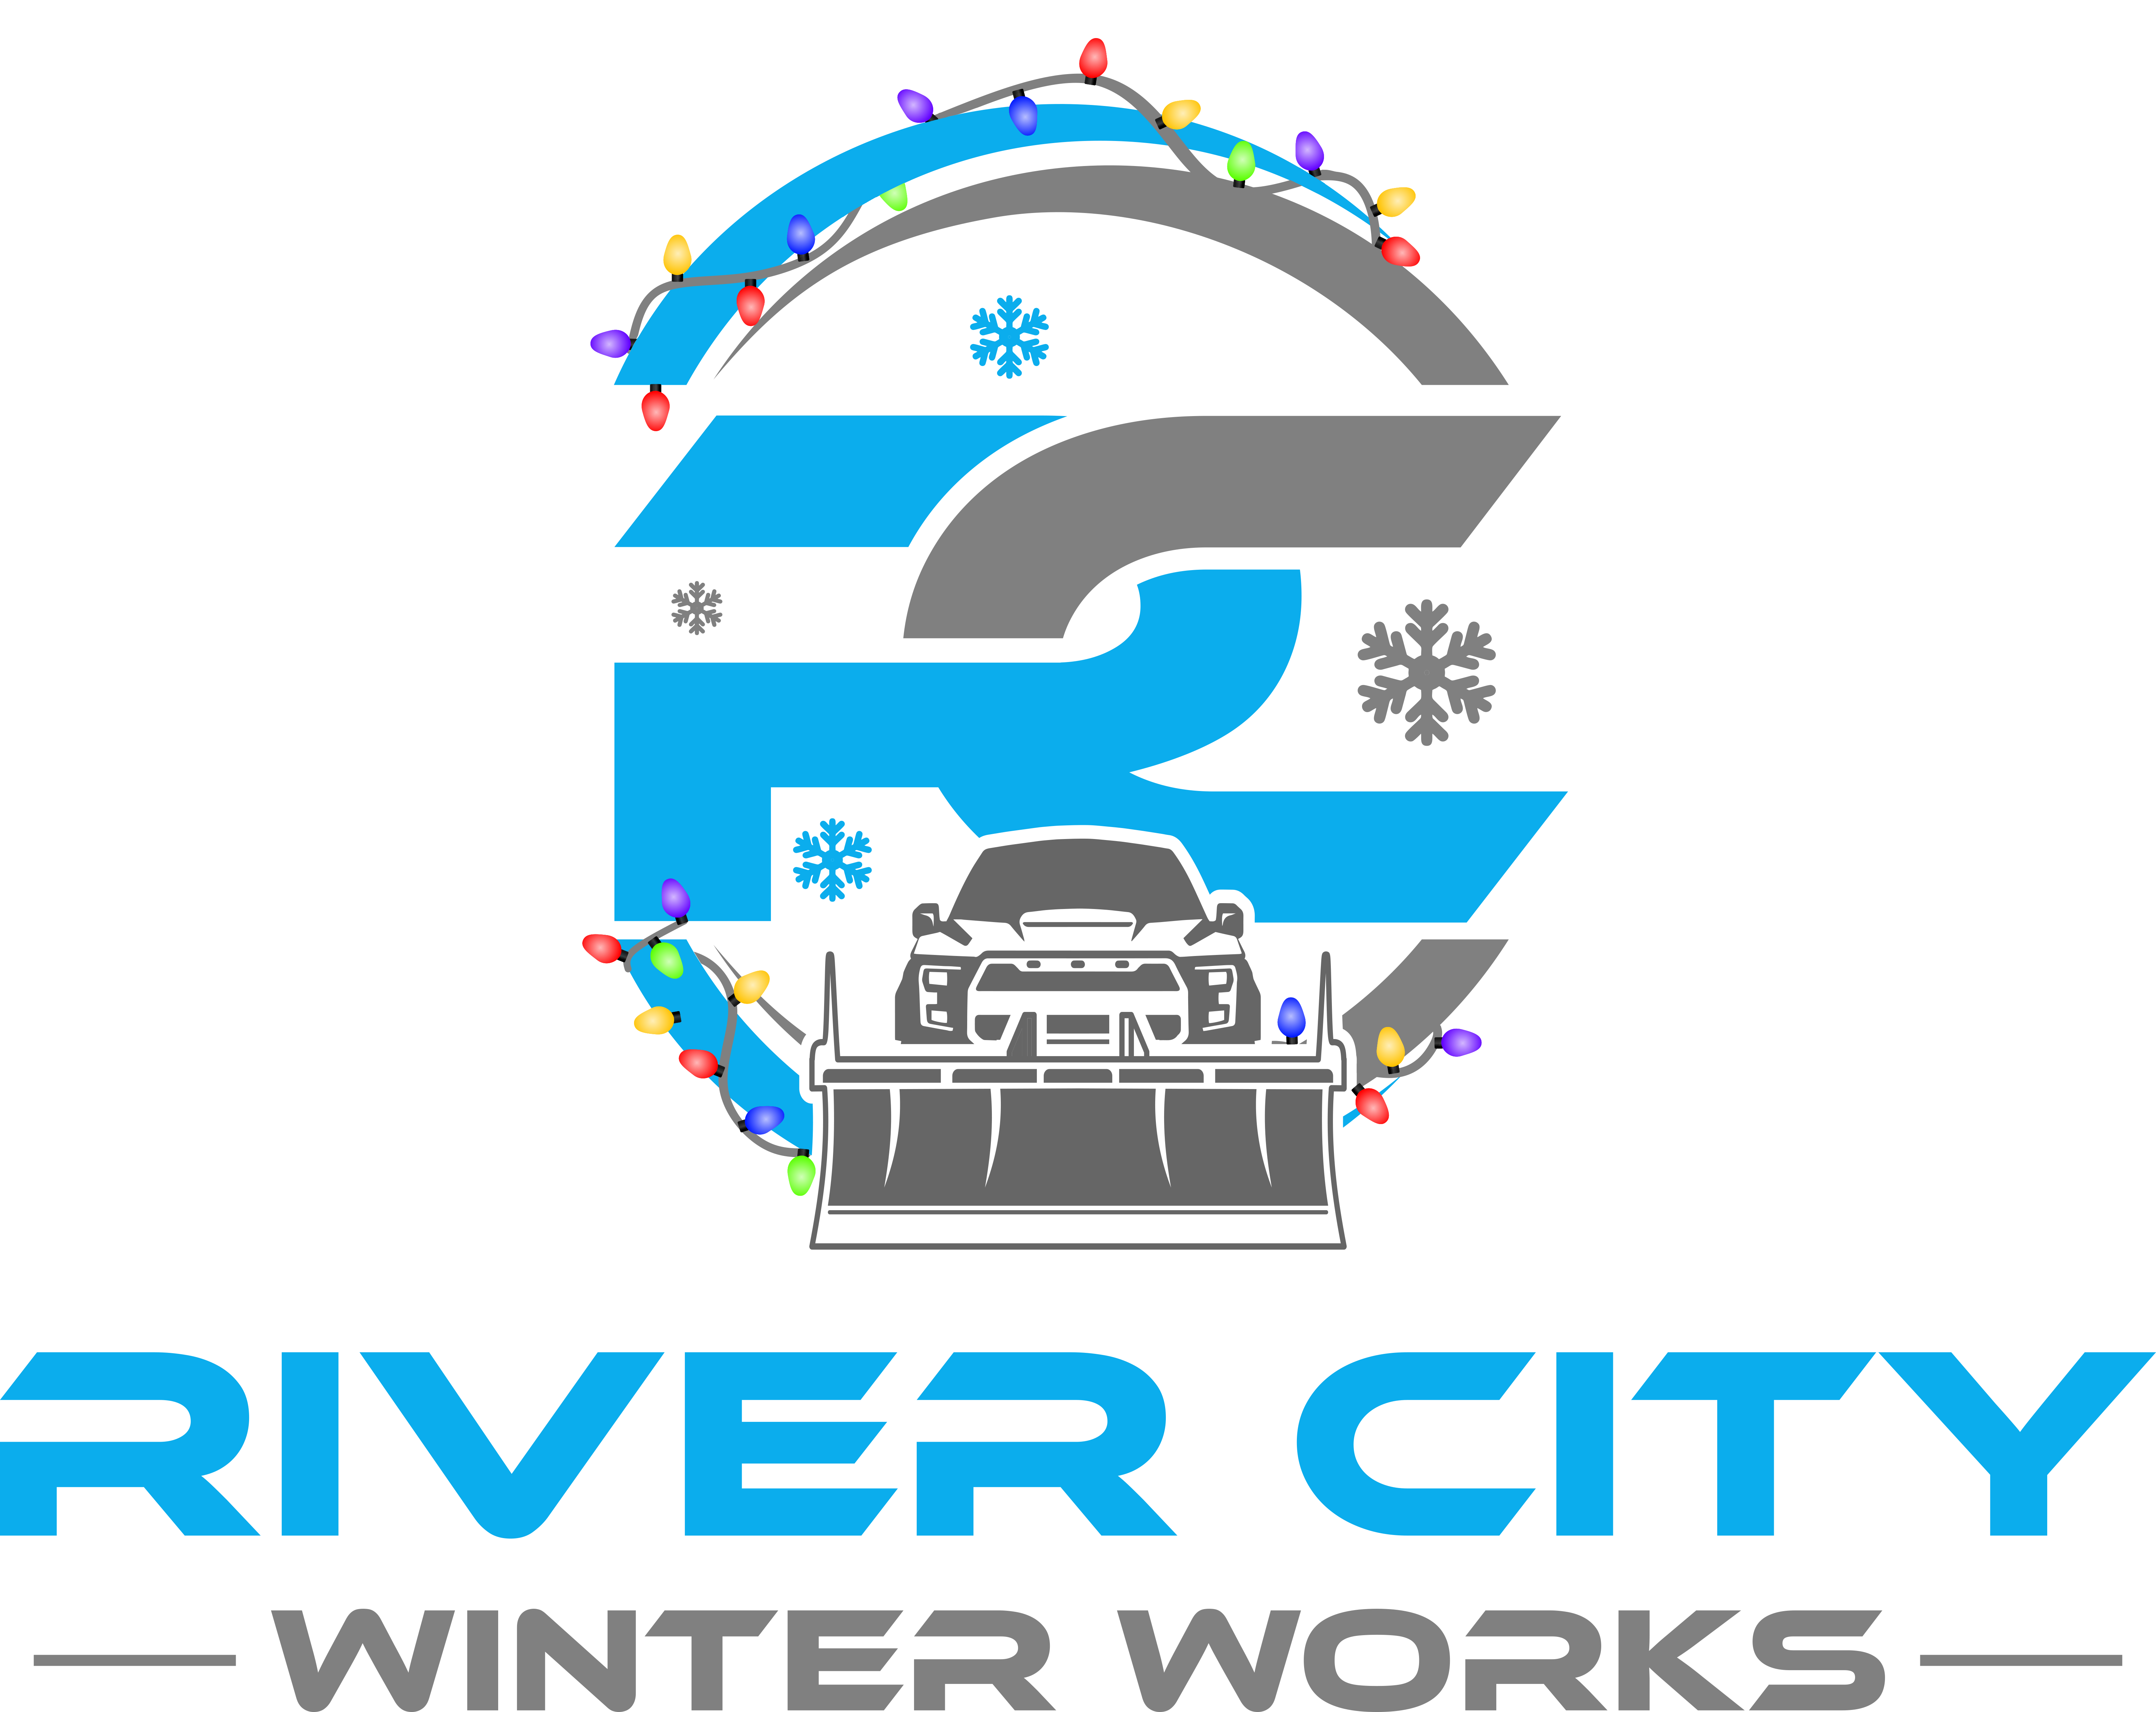 River City Winter Works Provides Gutter Cleaning Christmas Light Installation And Snow Removal to Central Illinois